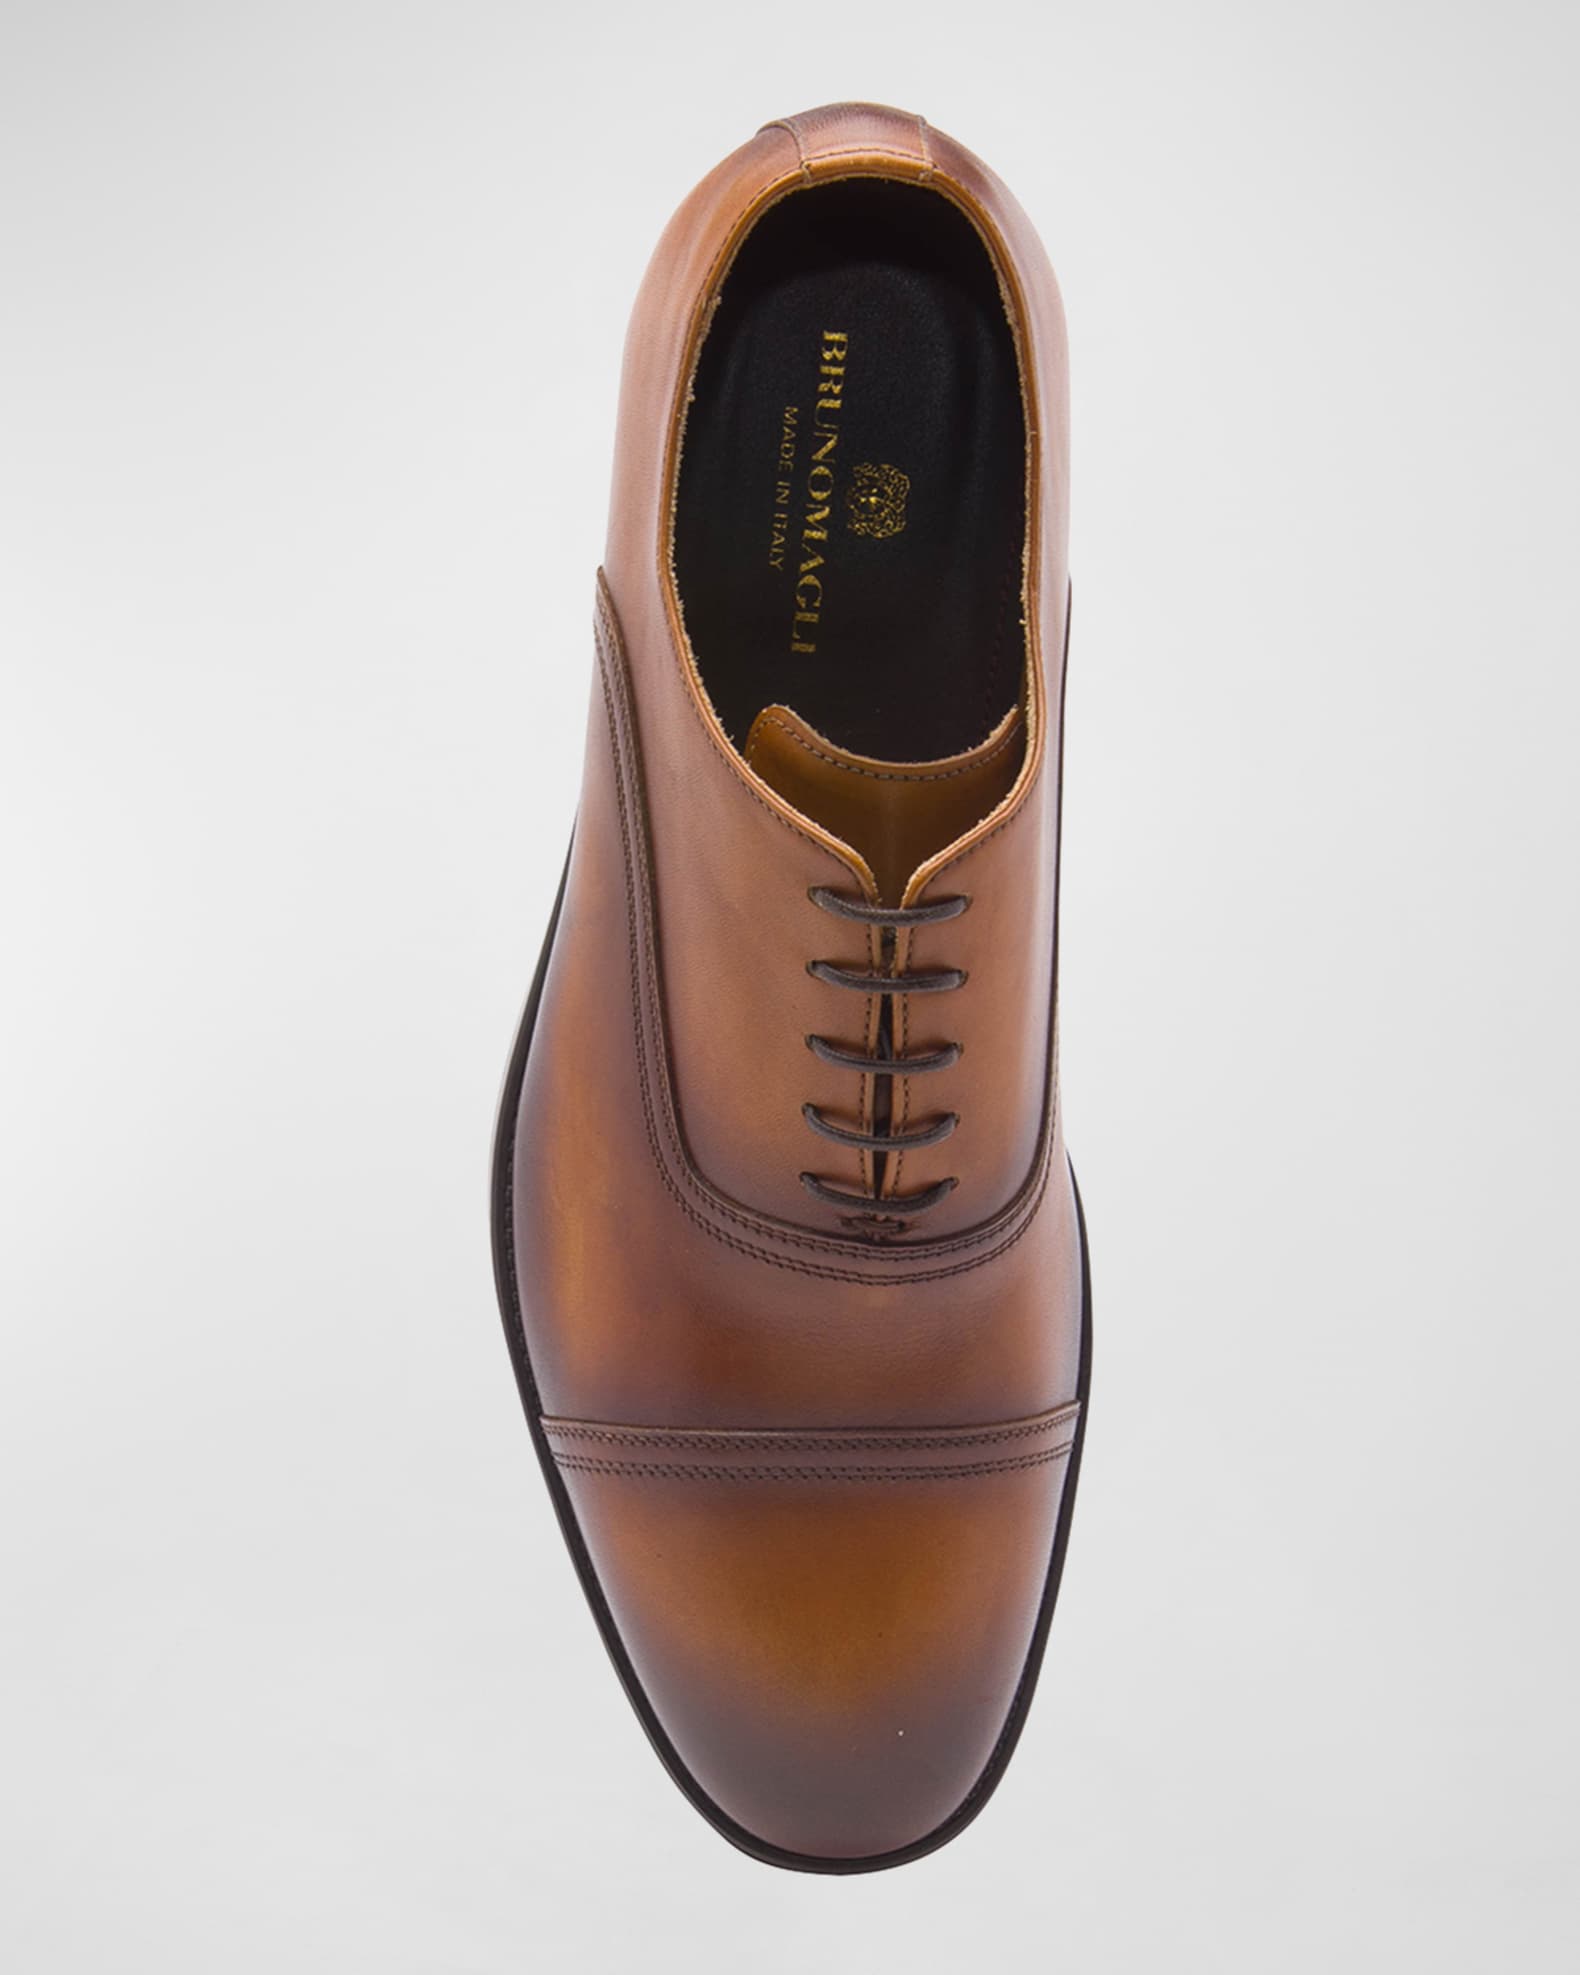 Bruno Magli Men's Butler Burnished Leather Oxford Shoes | Neiman Marcus